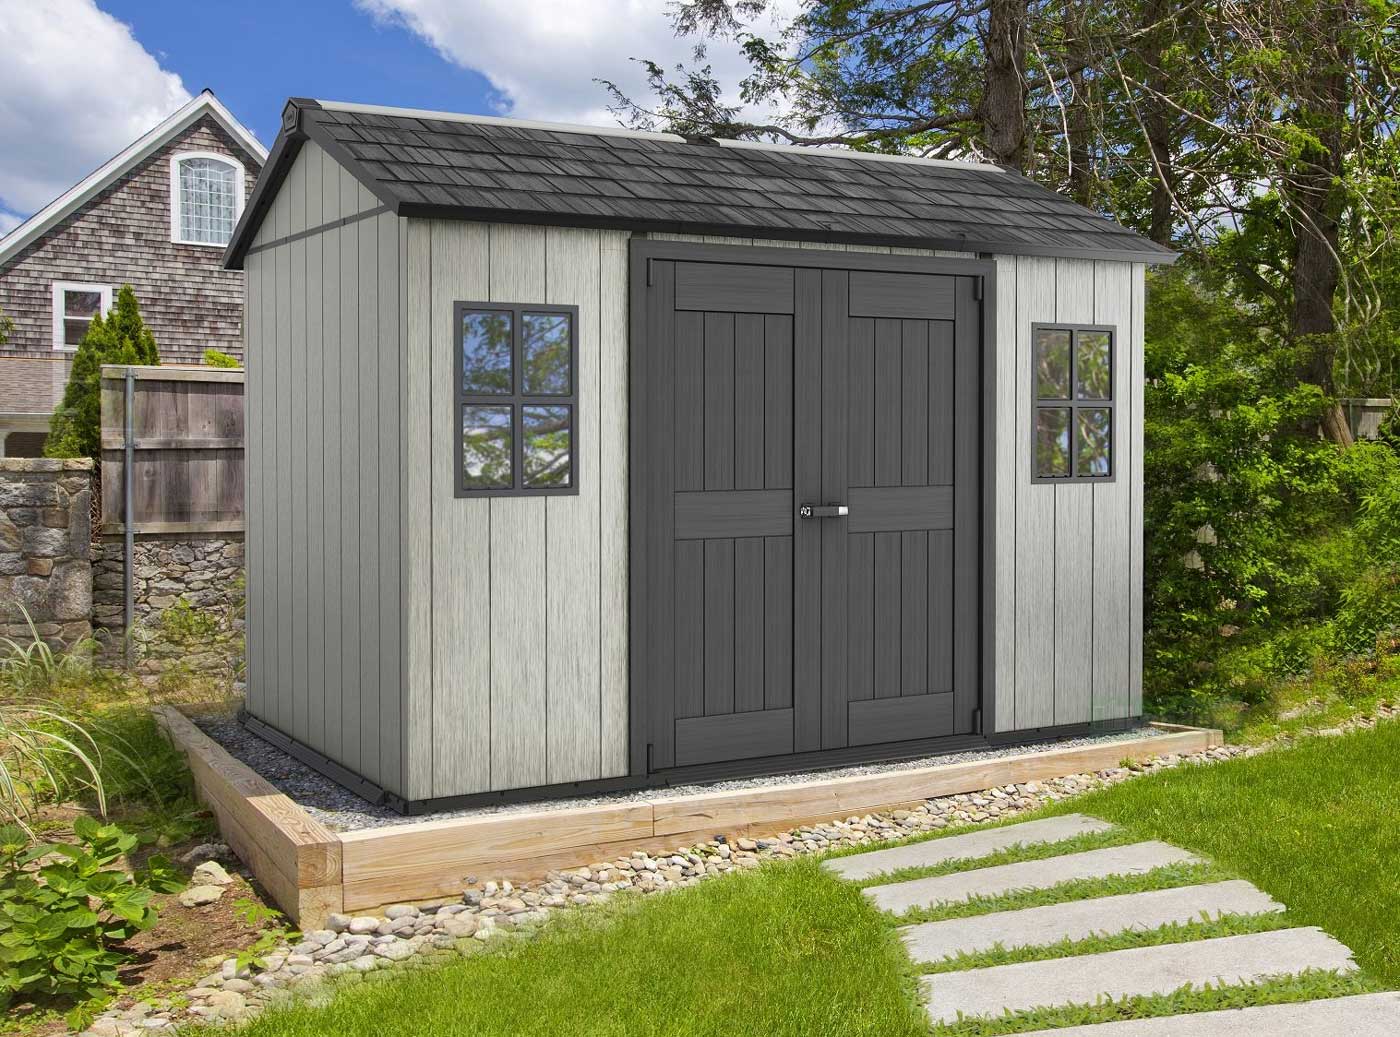 6 x 3 pent garden shed - 12mm tongue and groove walls